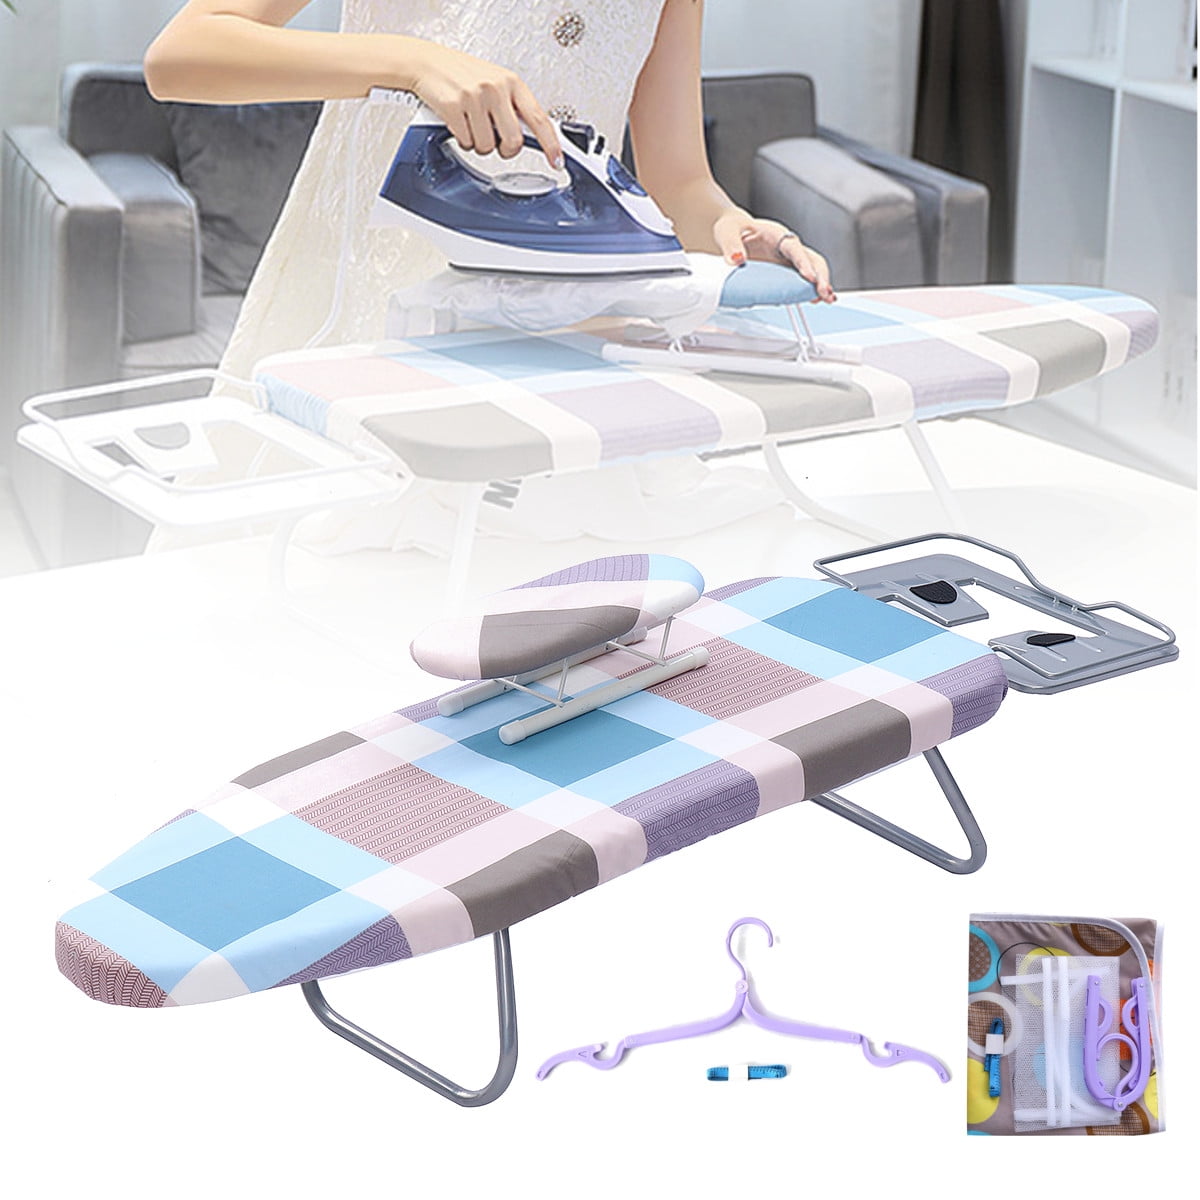 Asewun Travel Ironing Board Ironing Table Rack For Ironing Clothes